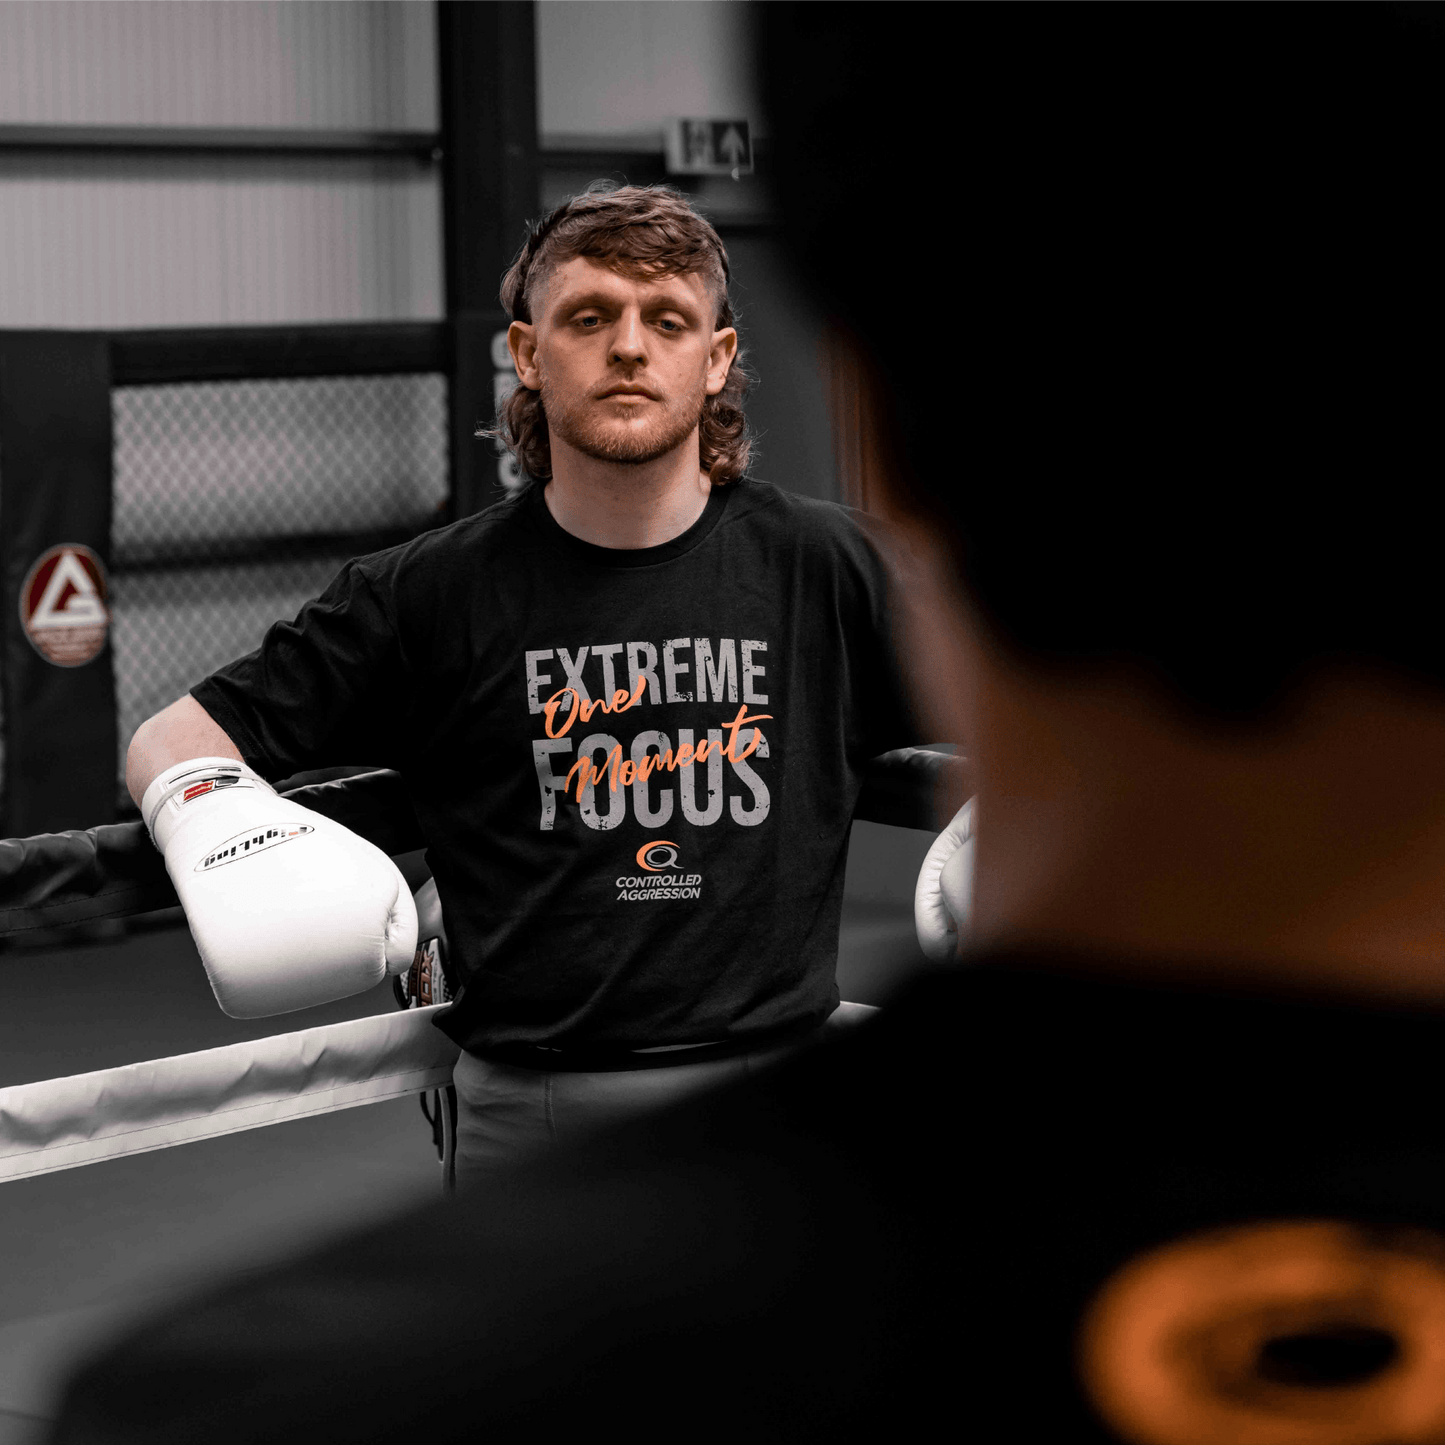 Extreme Focus, One Moment Tee